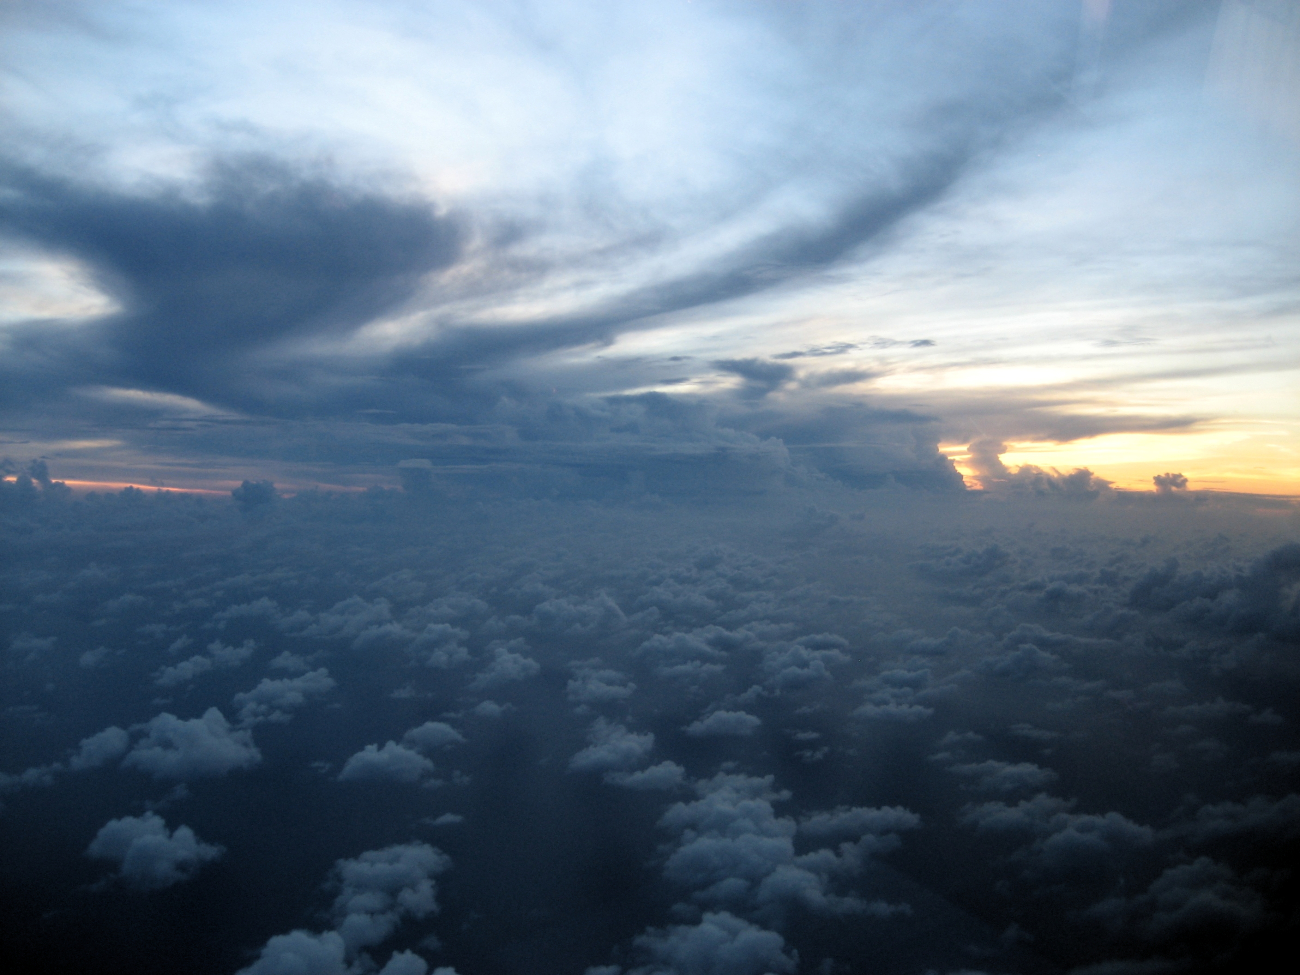 Storm seen at sunset during mission to Hurricane Karl